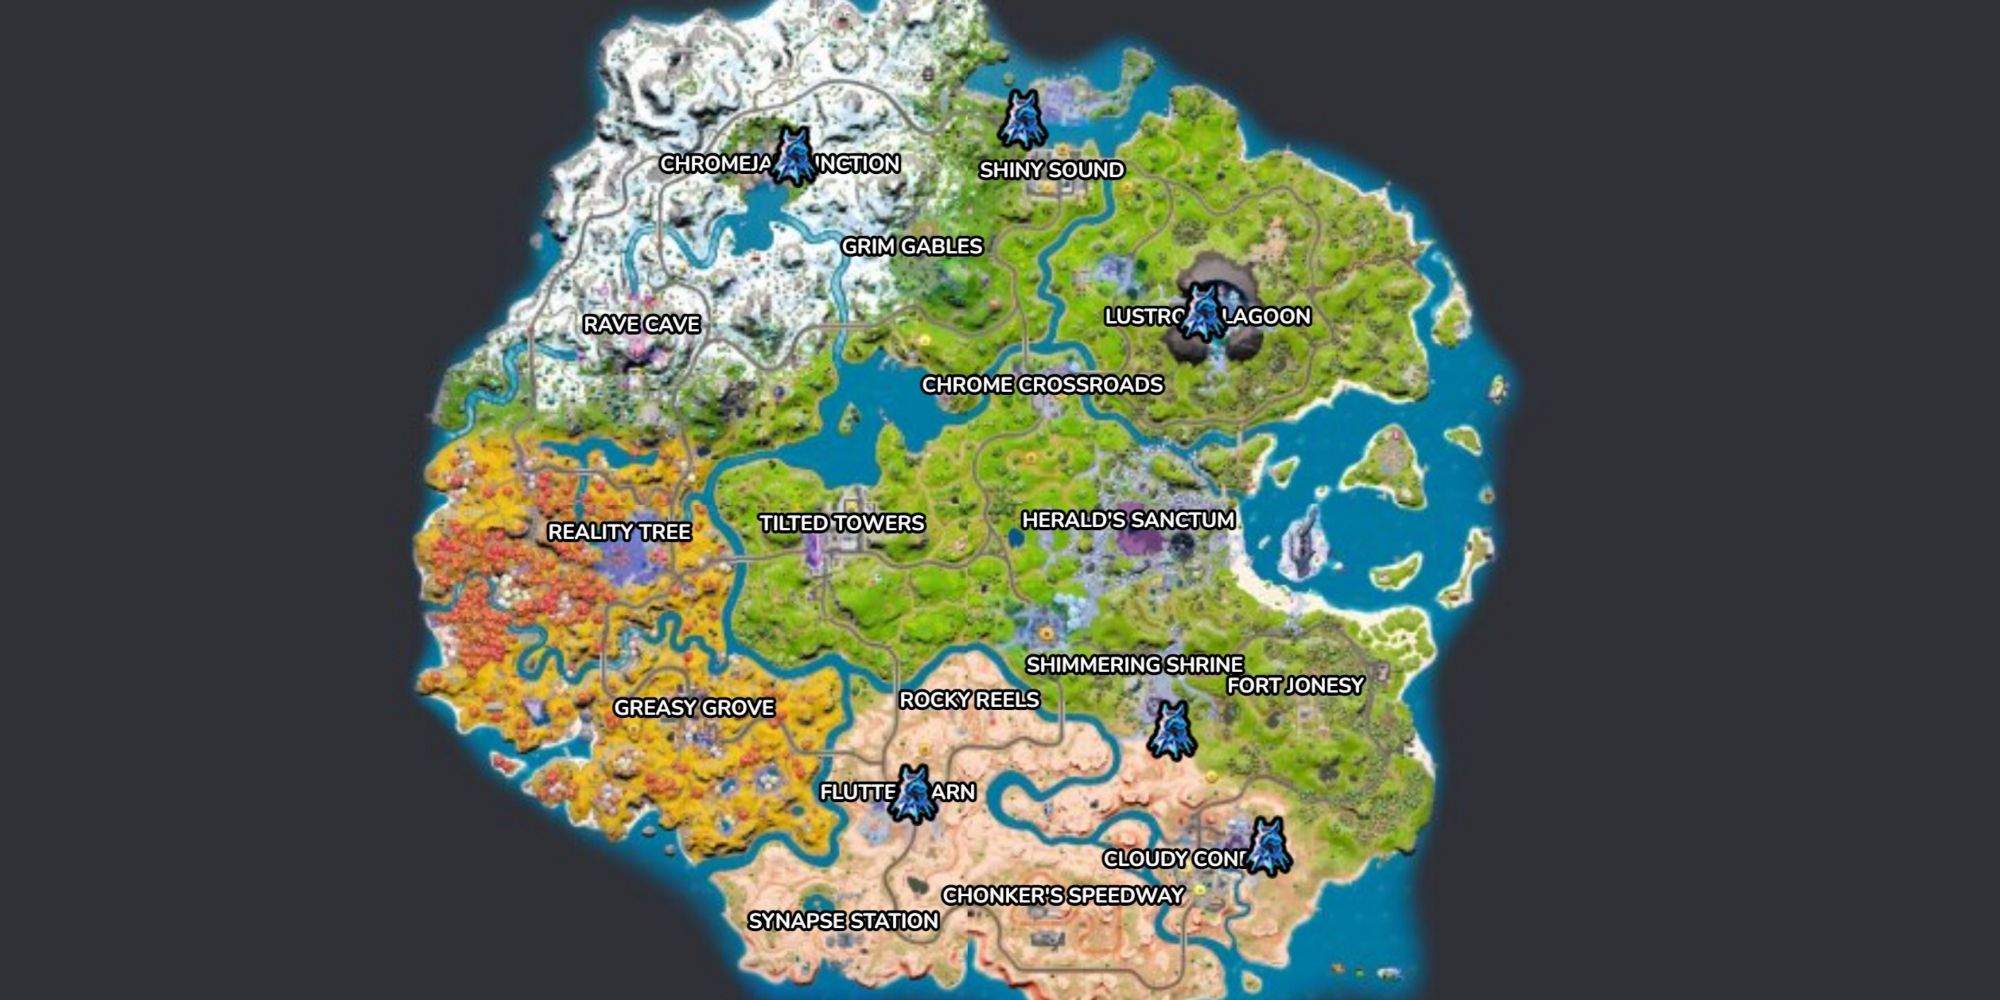 alteration alter locations in the battle royale map